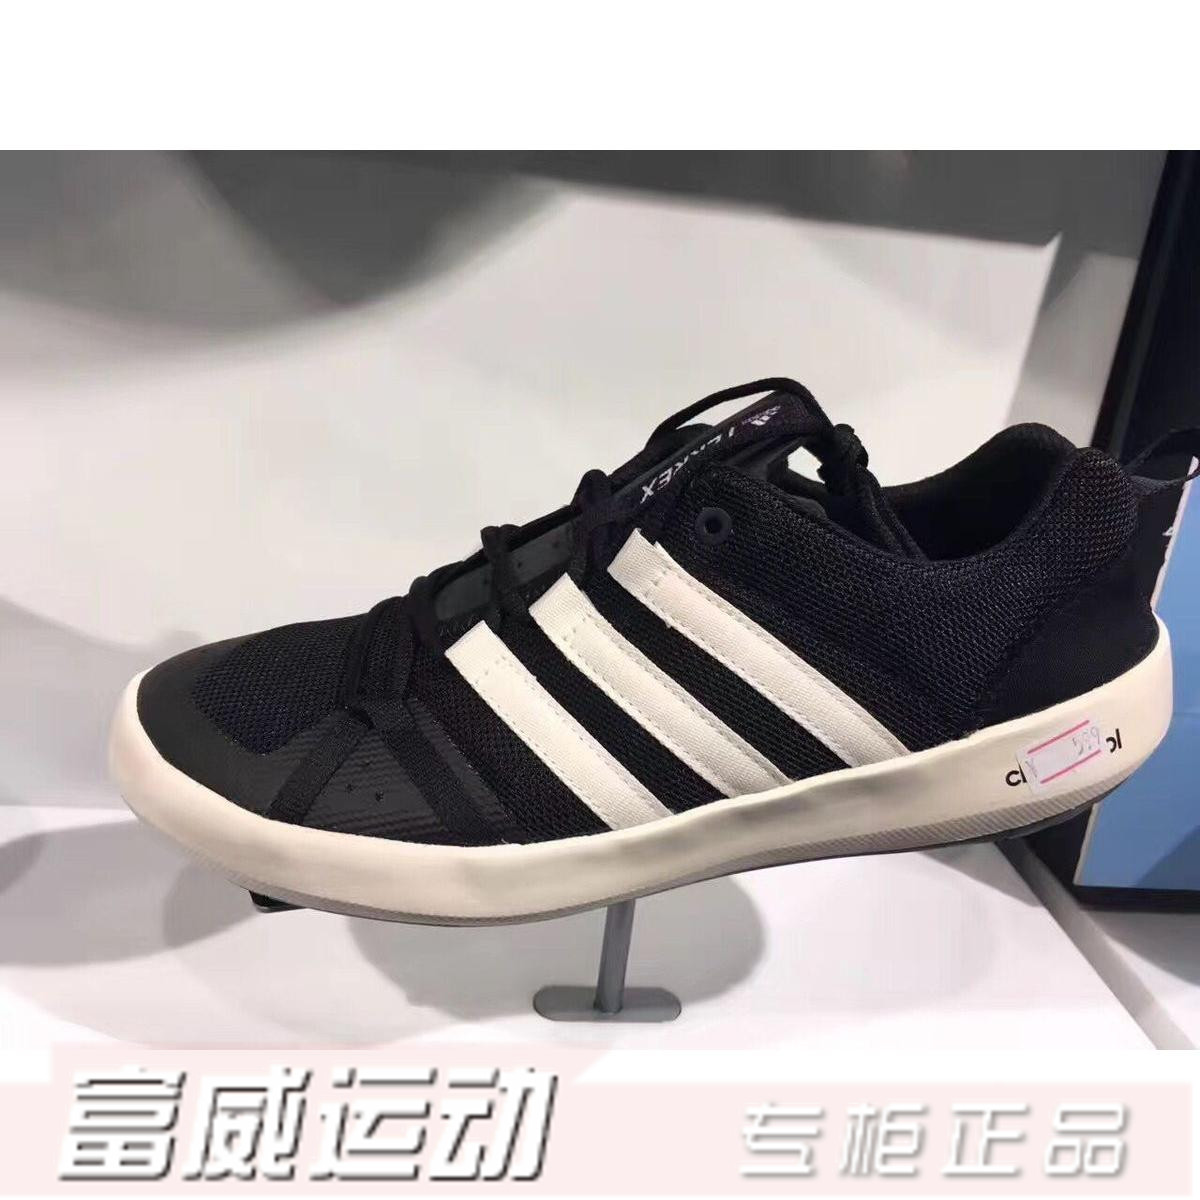 51.73] Authentic Adidas couple models quick-drying upstream wading 